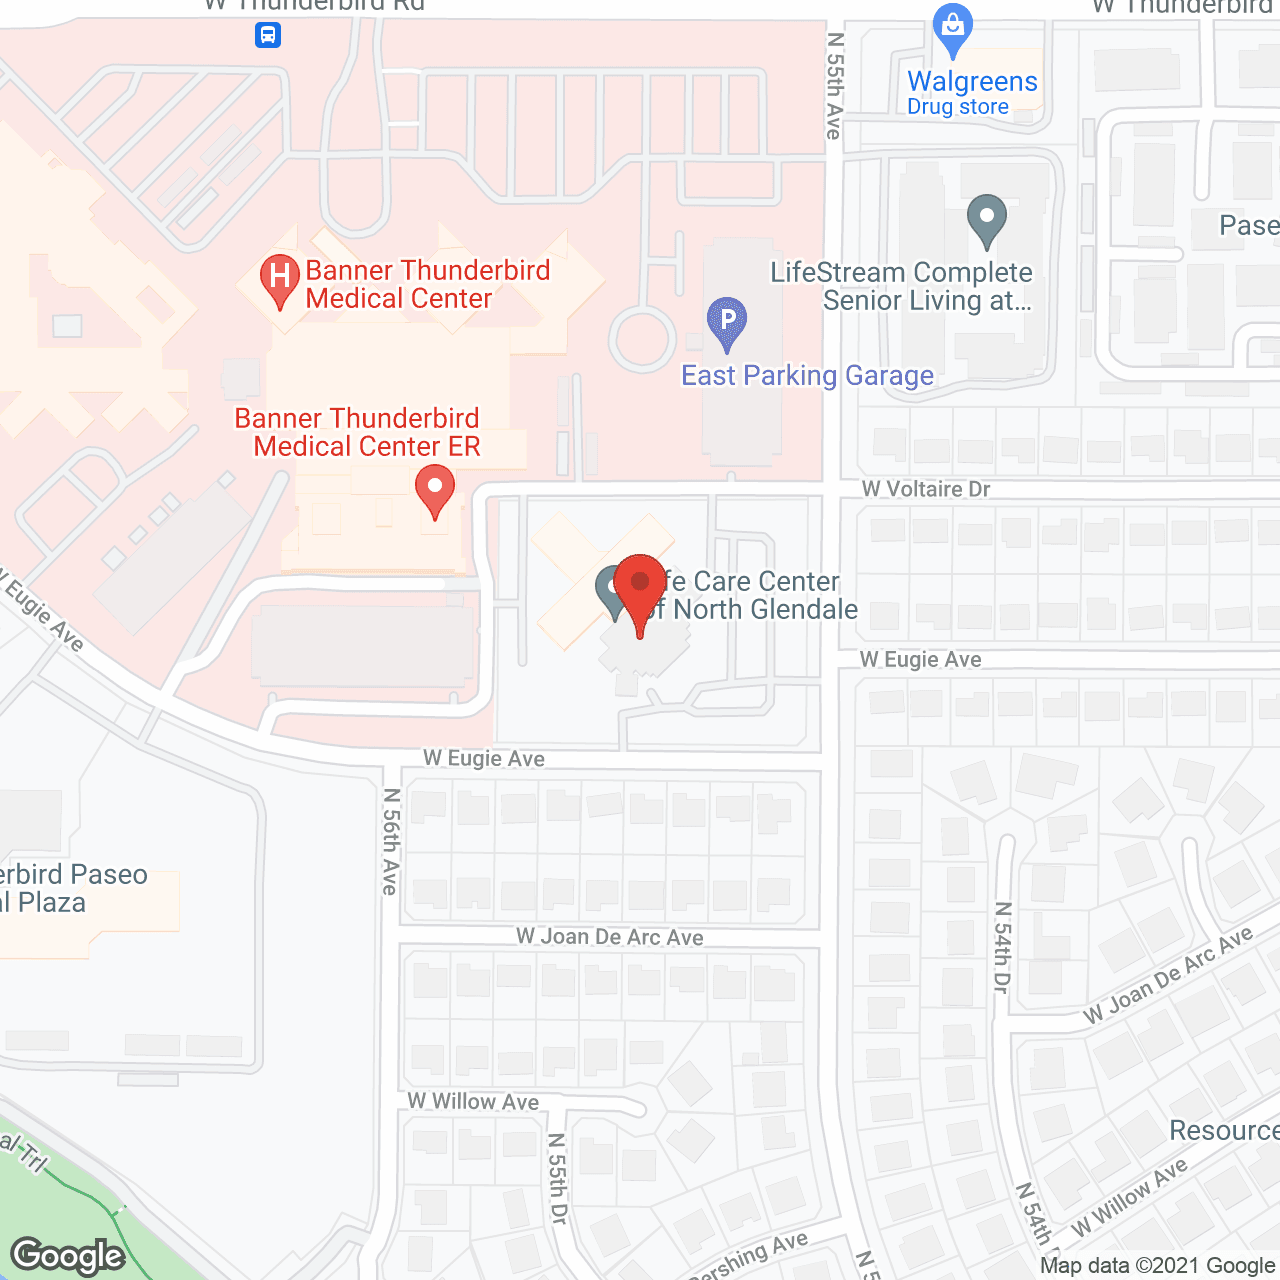 Life Care Center of North Glendale in google map